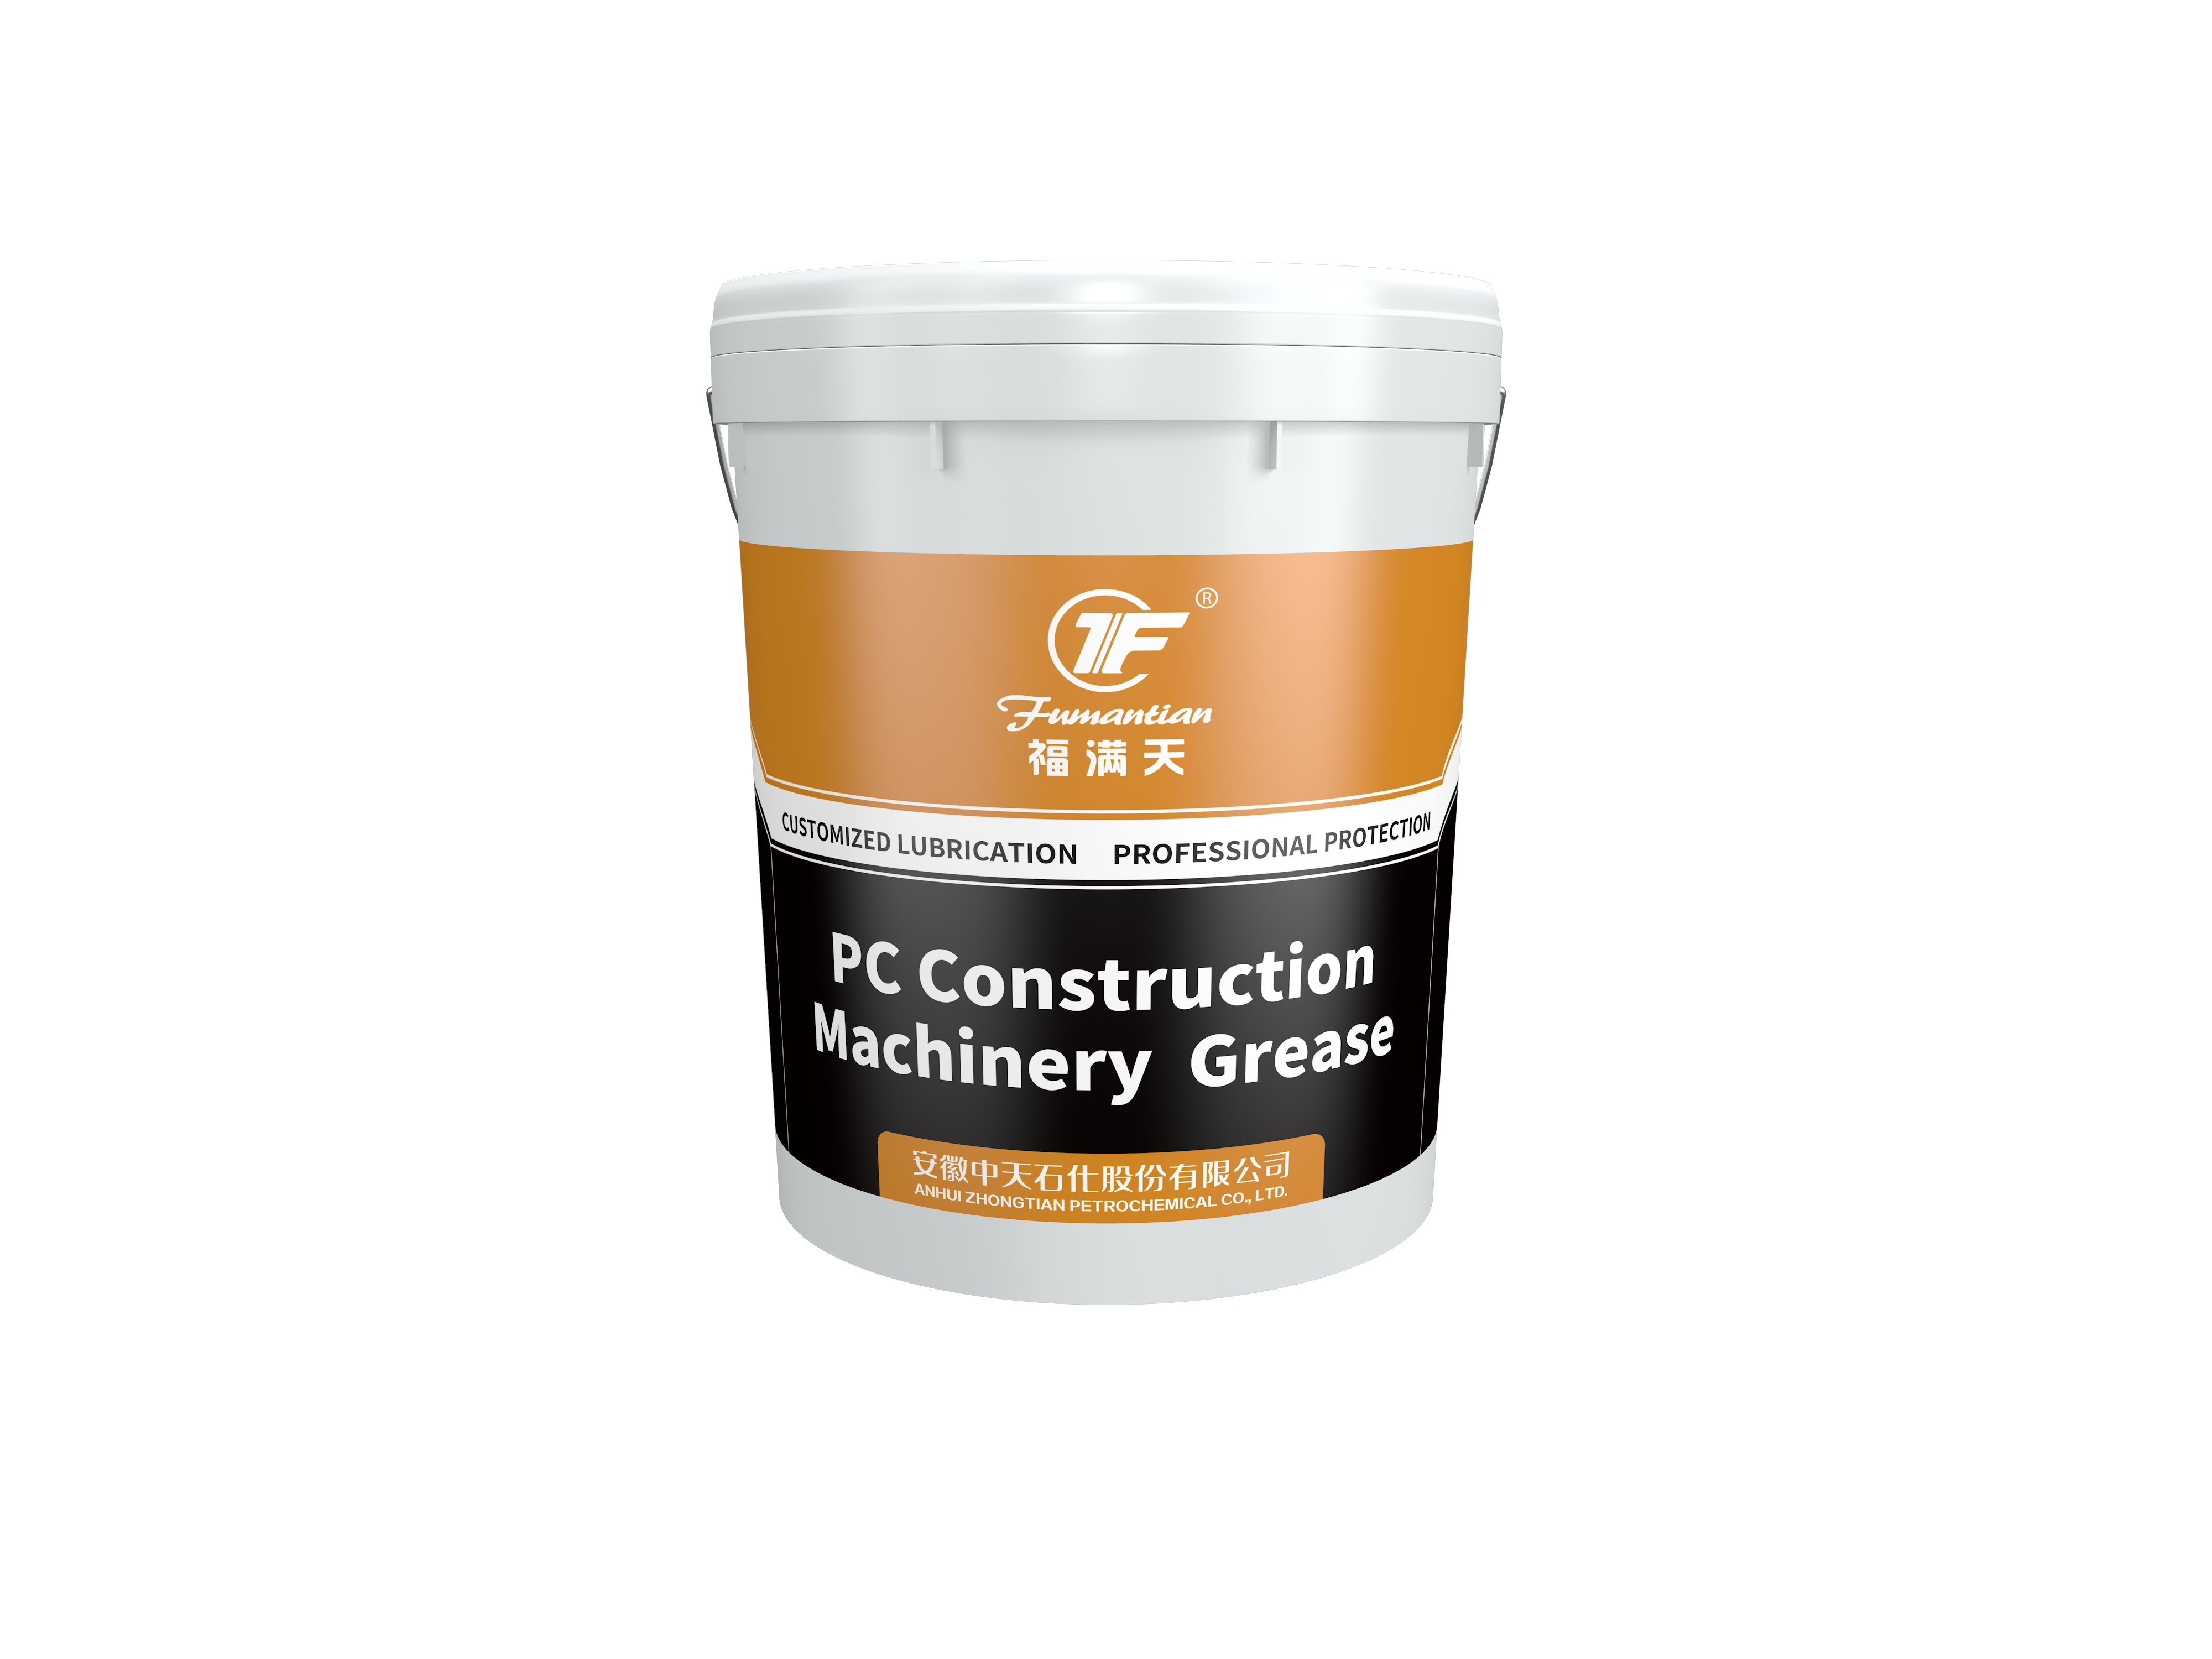 PC Construction Machinery Grease